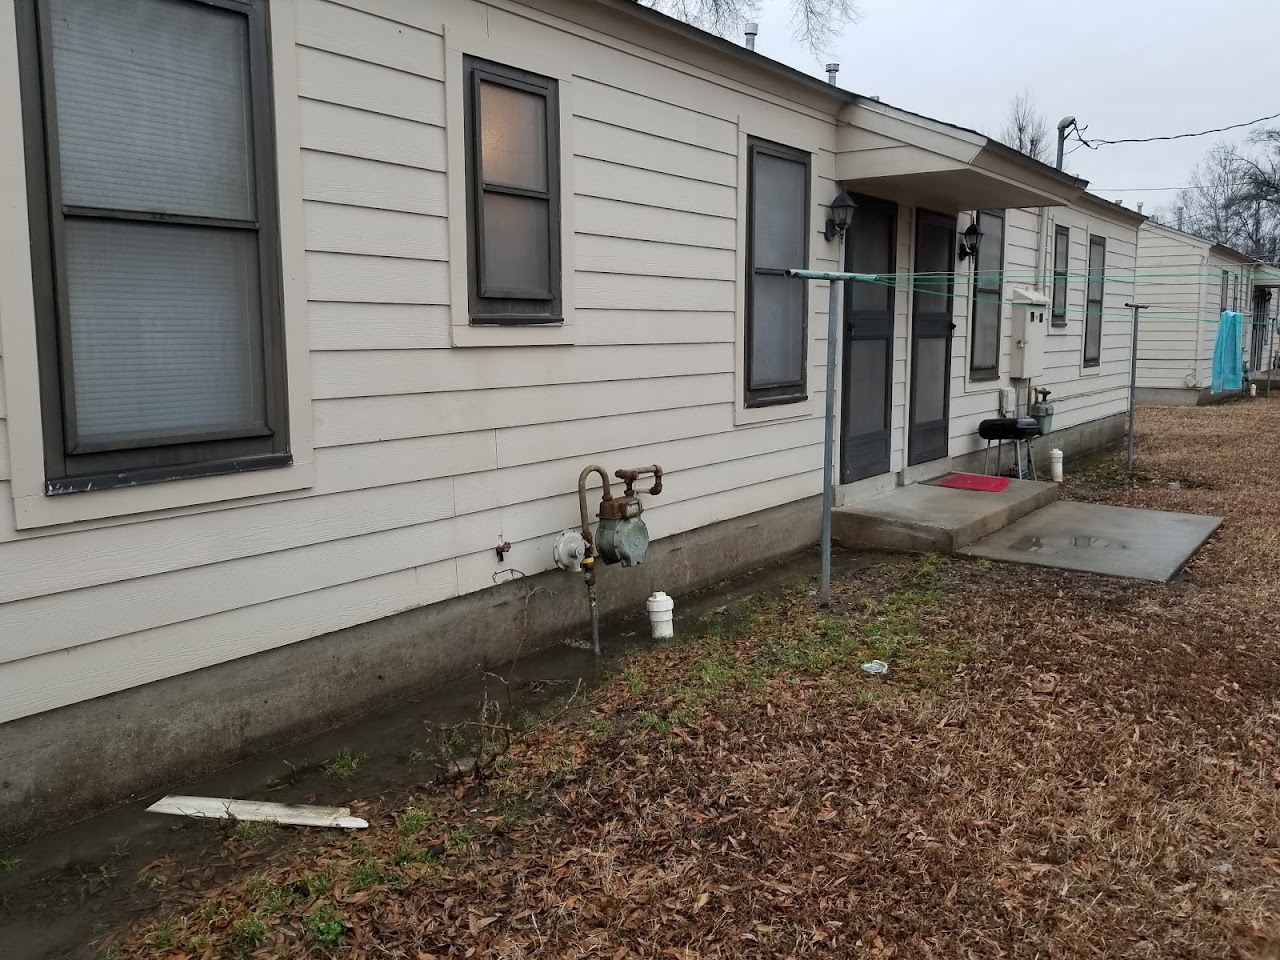 Photo of WILLOW PARK APARTMENTS. Affordable housing located at 600 RITCHIE APARTMENTS CLARKSDALE, MS 38614